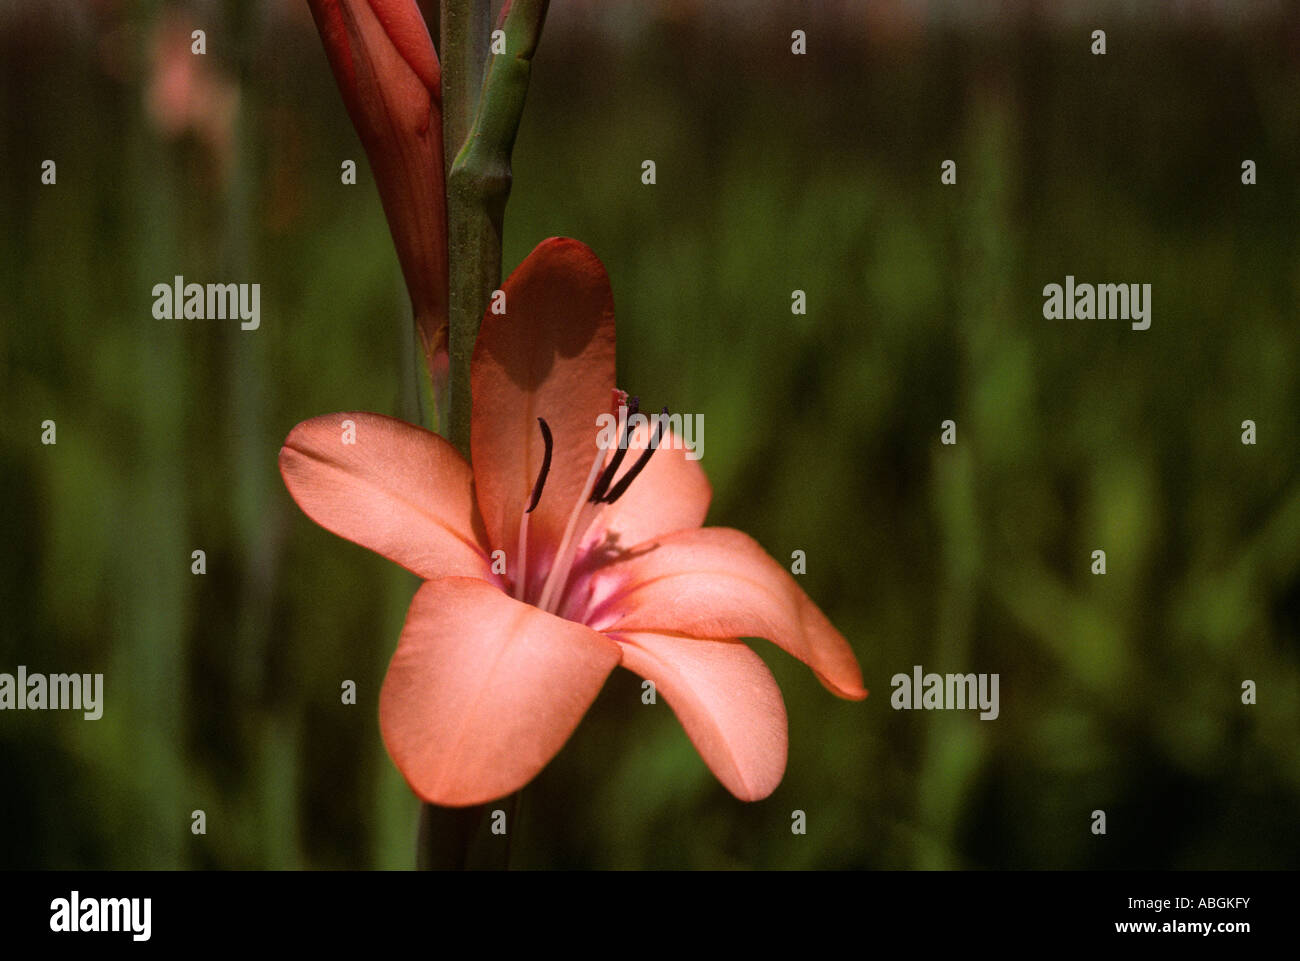 Watsonia Peach Glow. Cultivated flower from bulb Stock Photo